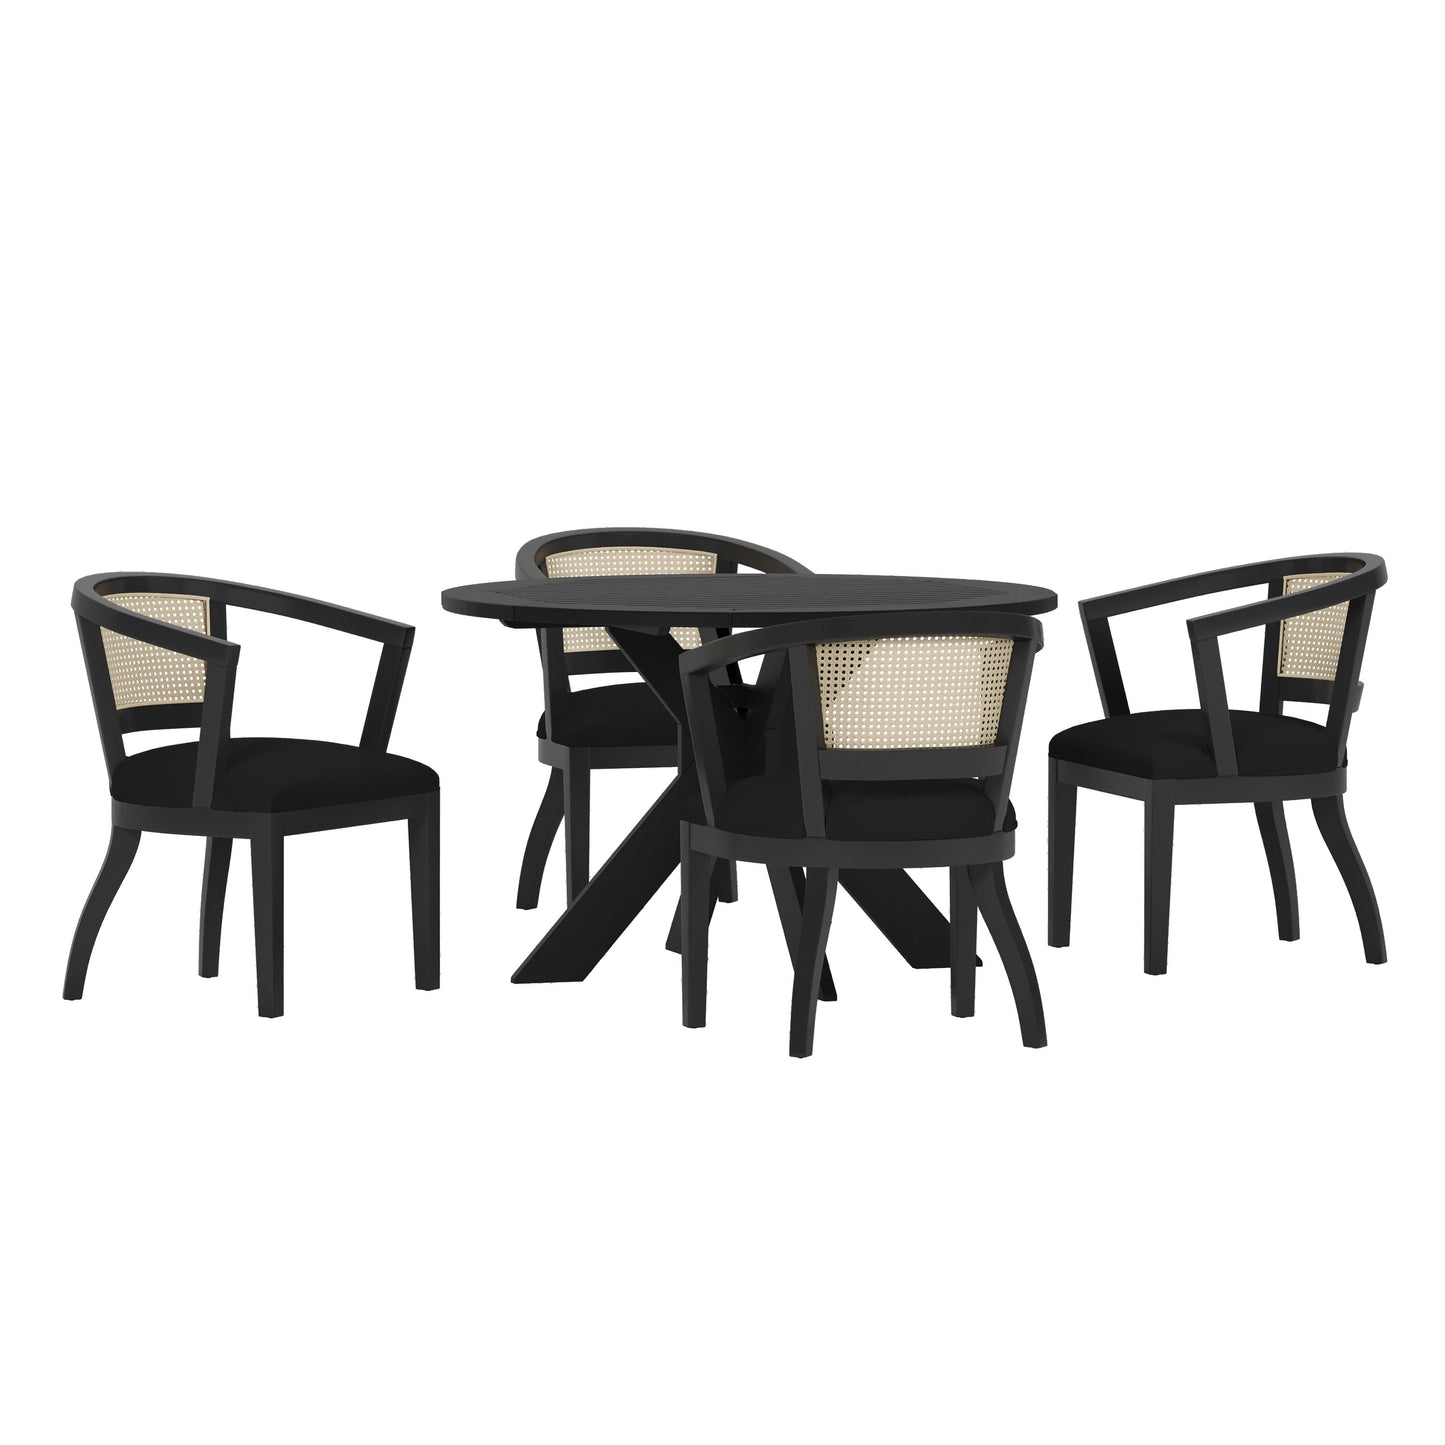 Bannock Contemporary Upholstered Wood and Cane 5 Piece Dining Set